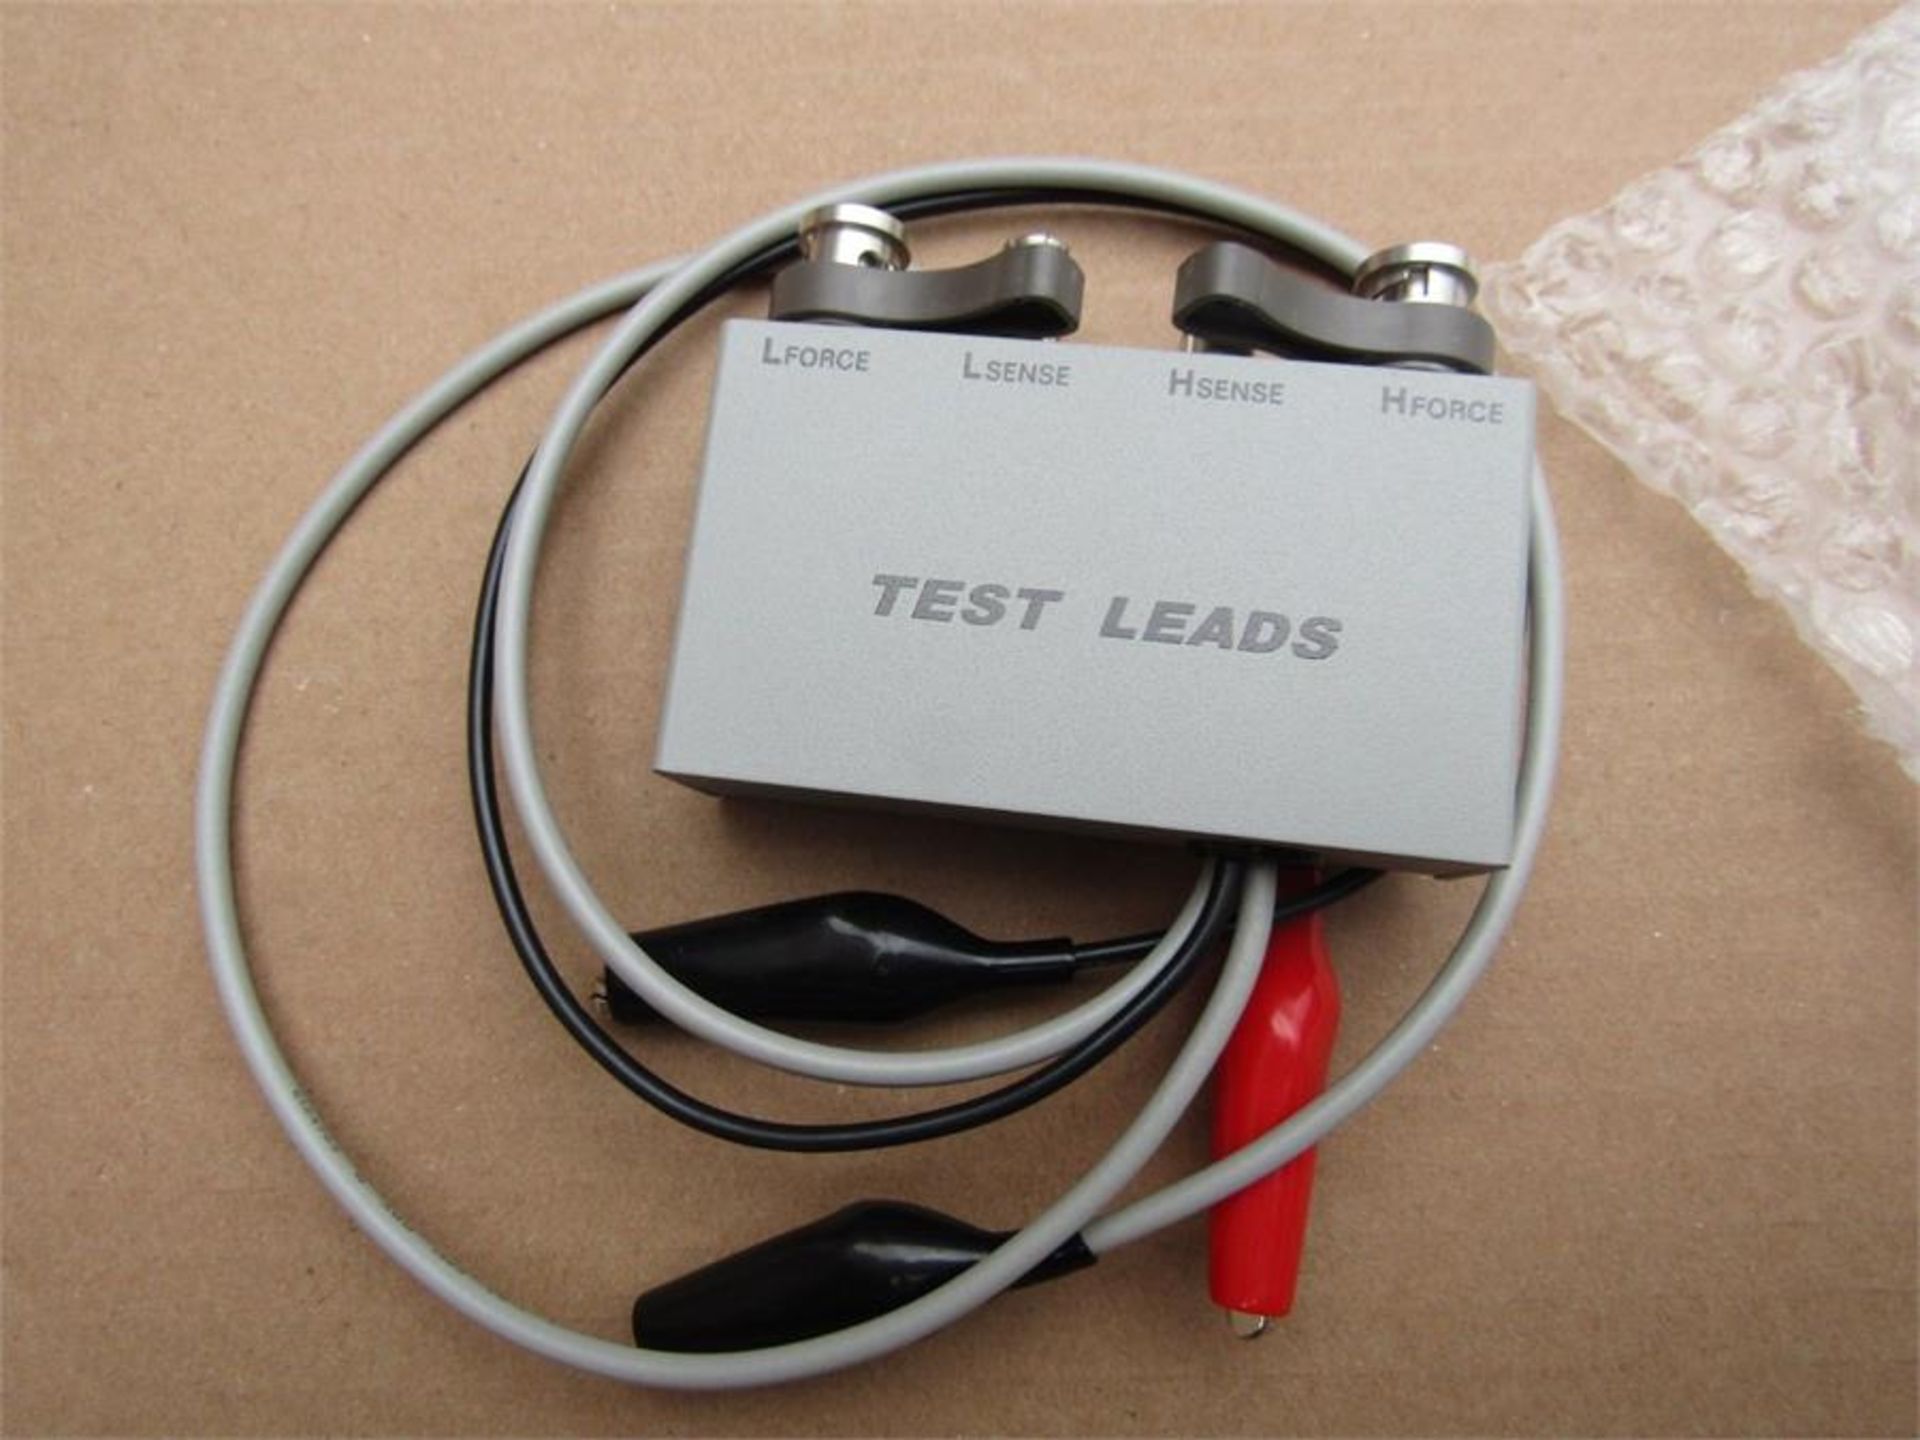 ISO-TECH LCR Test Leads - Test Fixture 2 Wire with Alligator Clips - A9 6666457